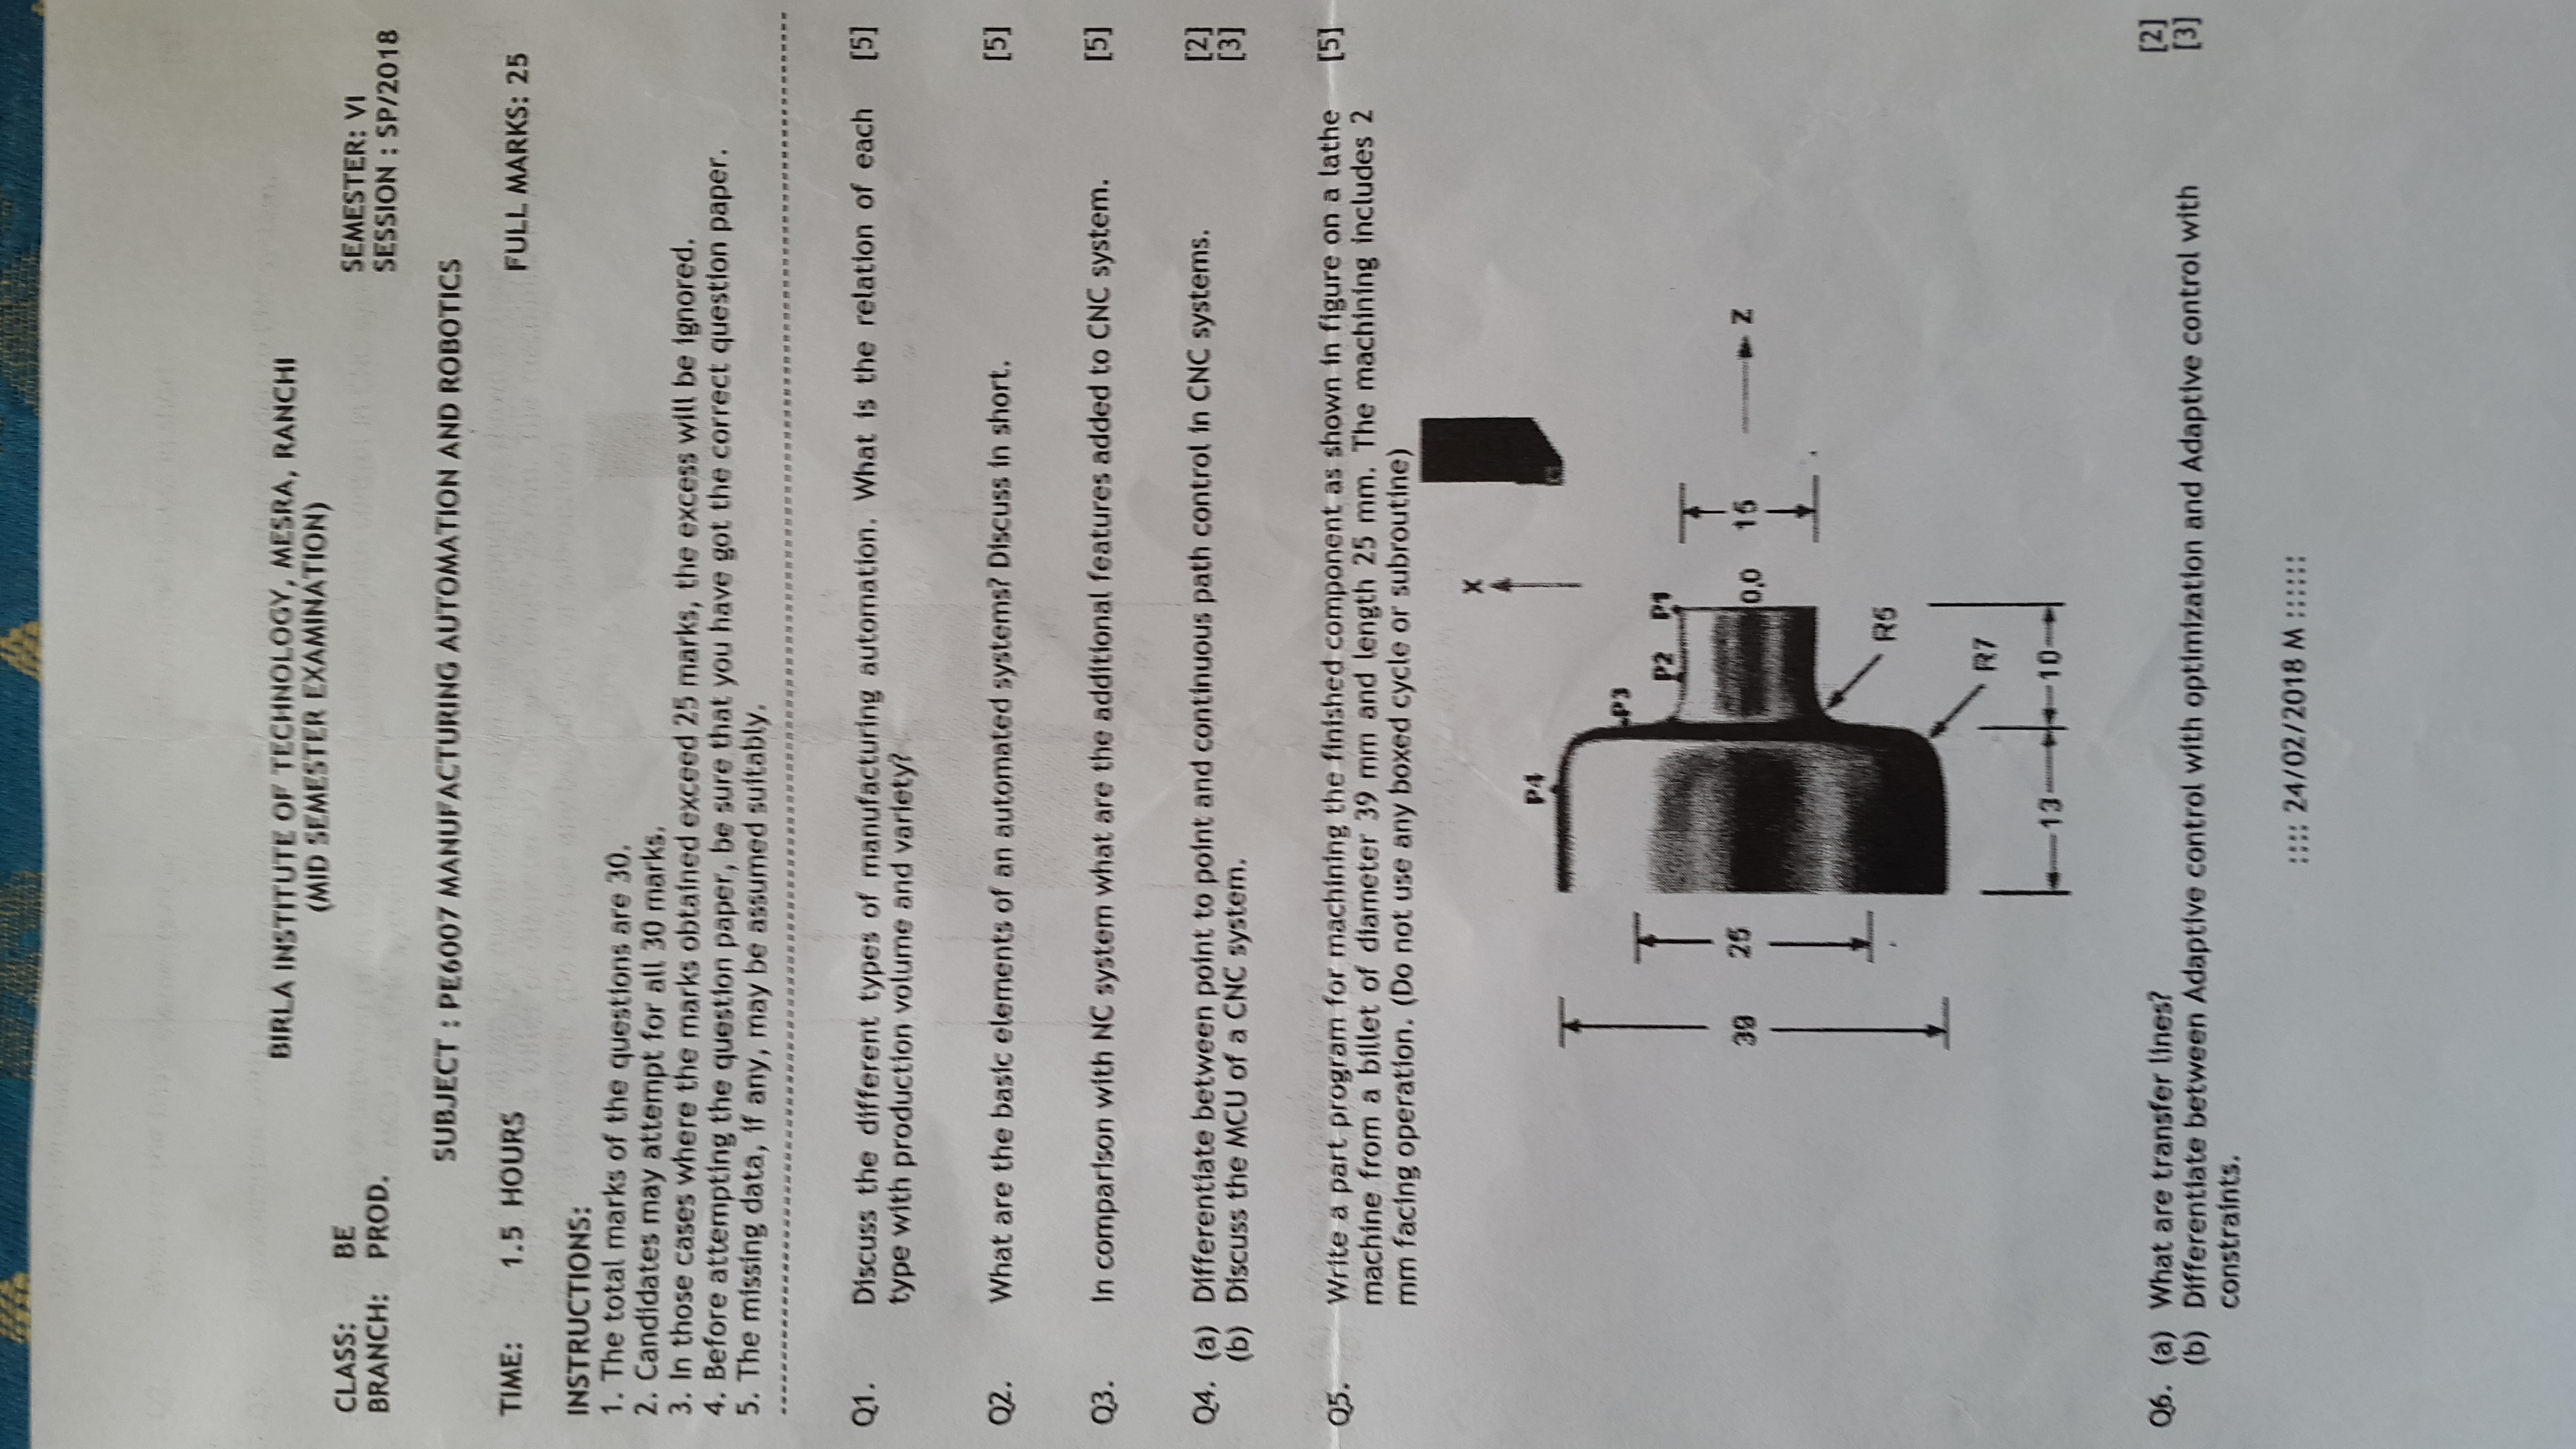 Manufacturing Automation And Robotics Question Paper-2480_KQWxAp.jpg